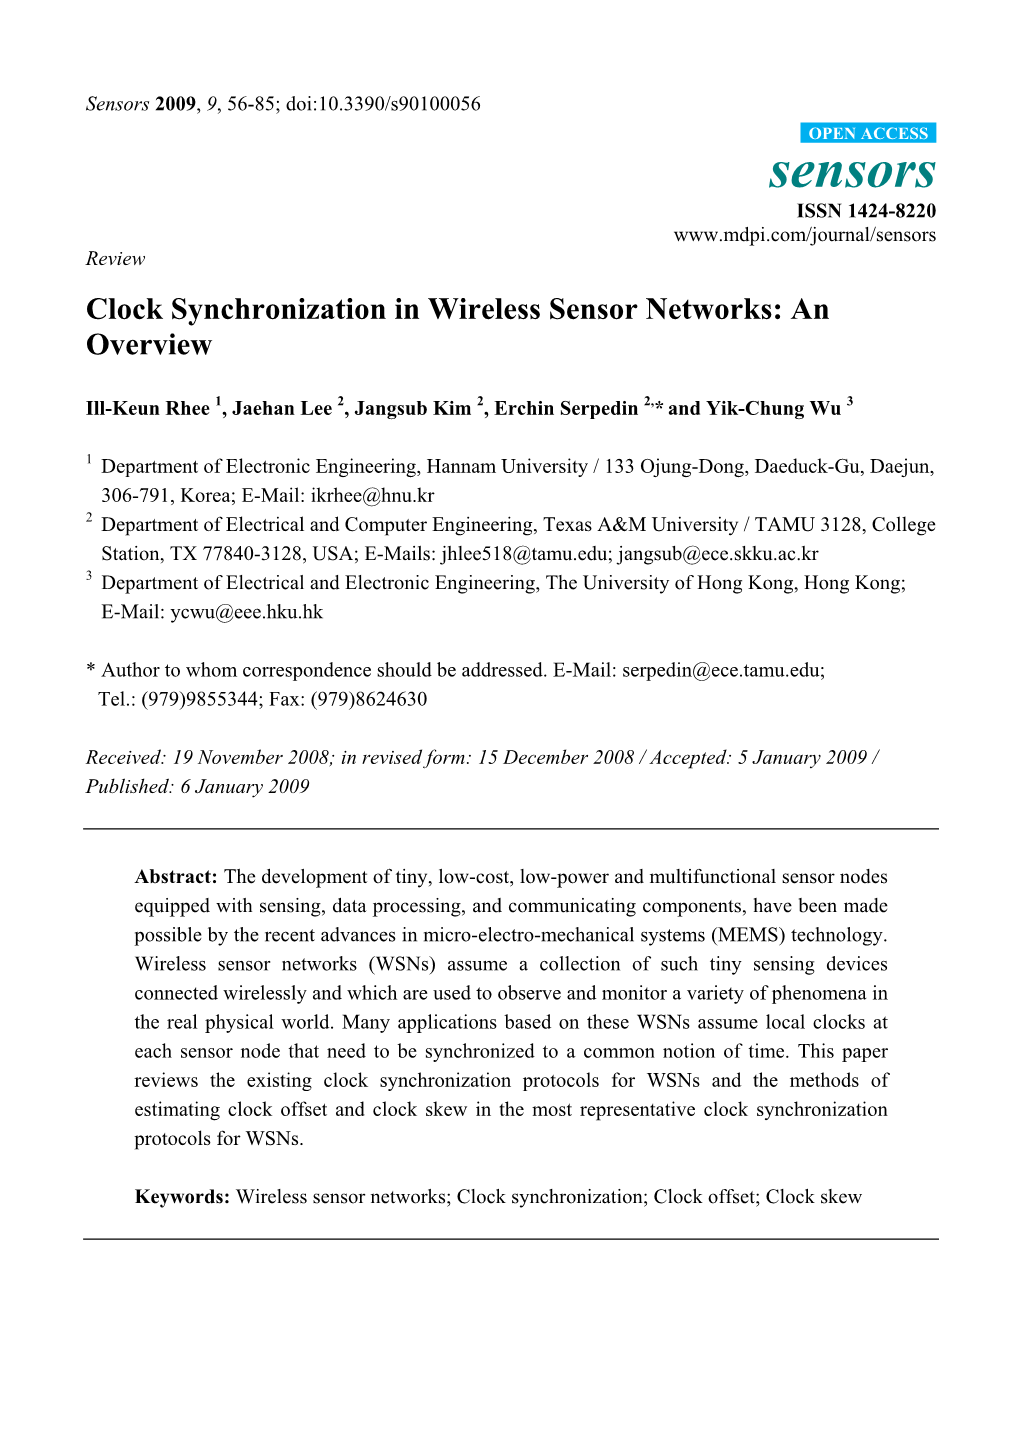 Clock Synchronization in Wireless Sensor Networks: an Overview